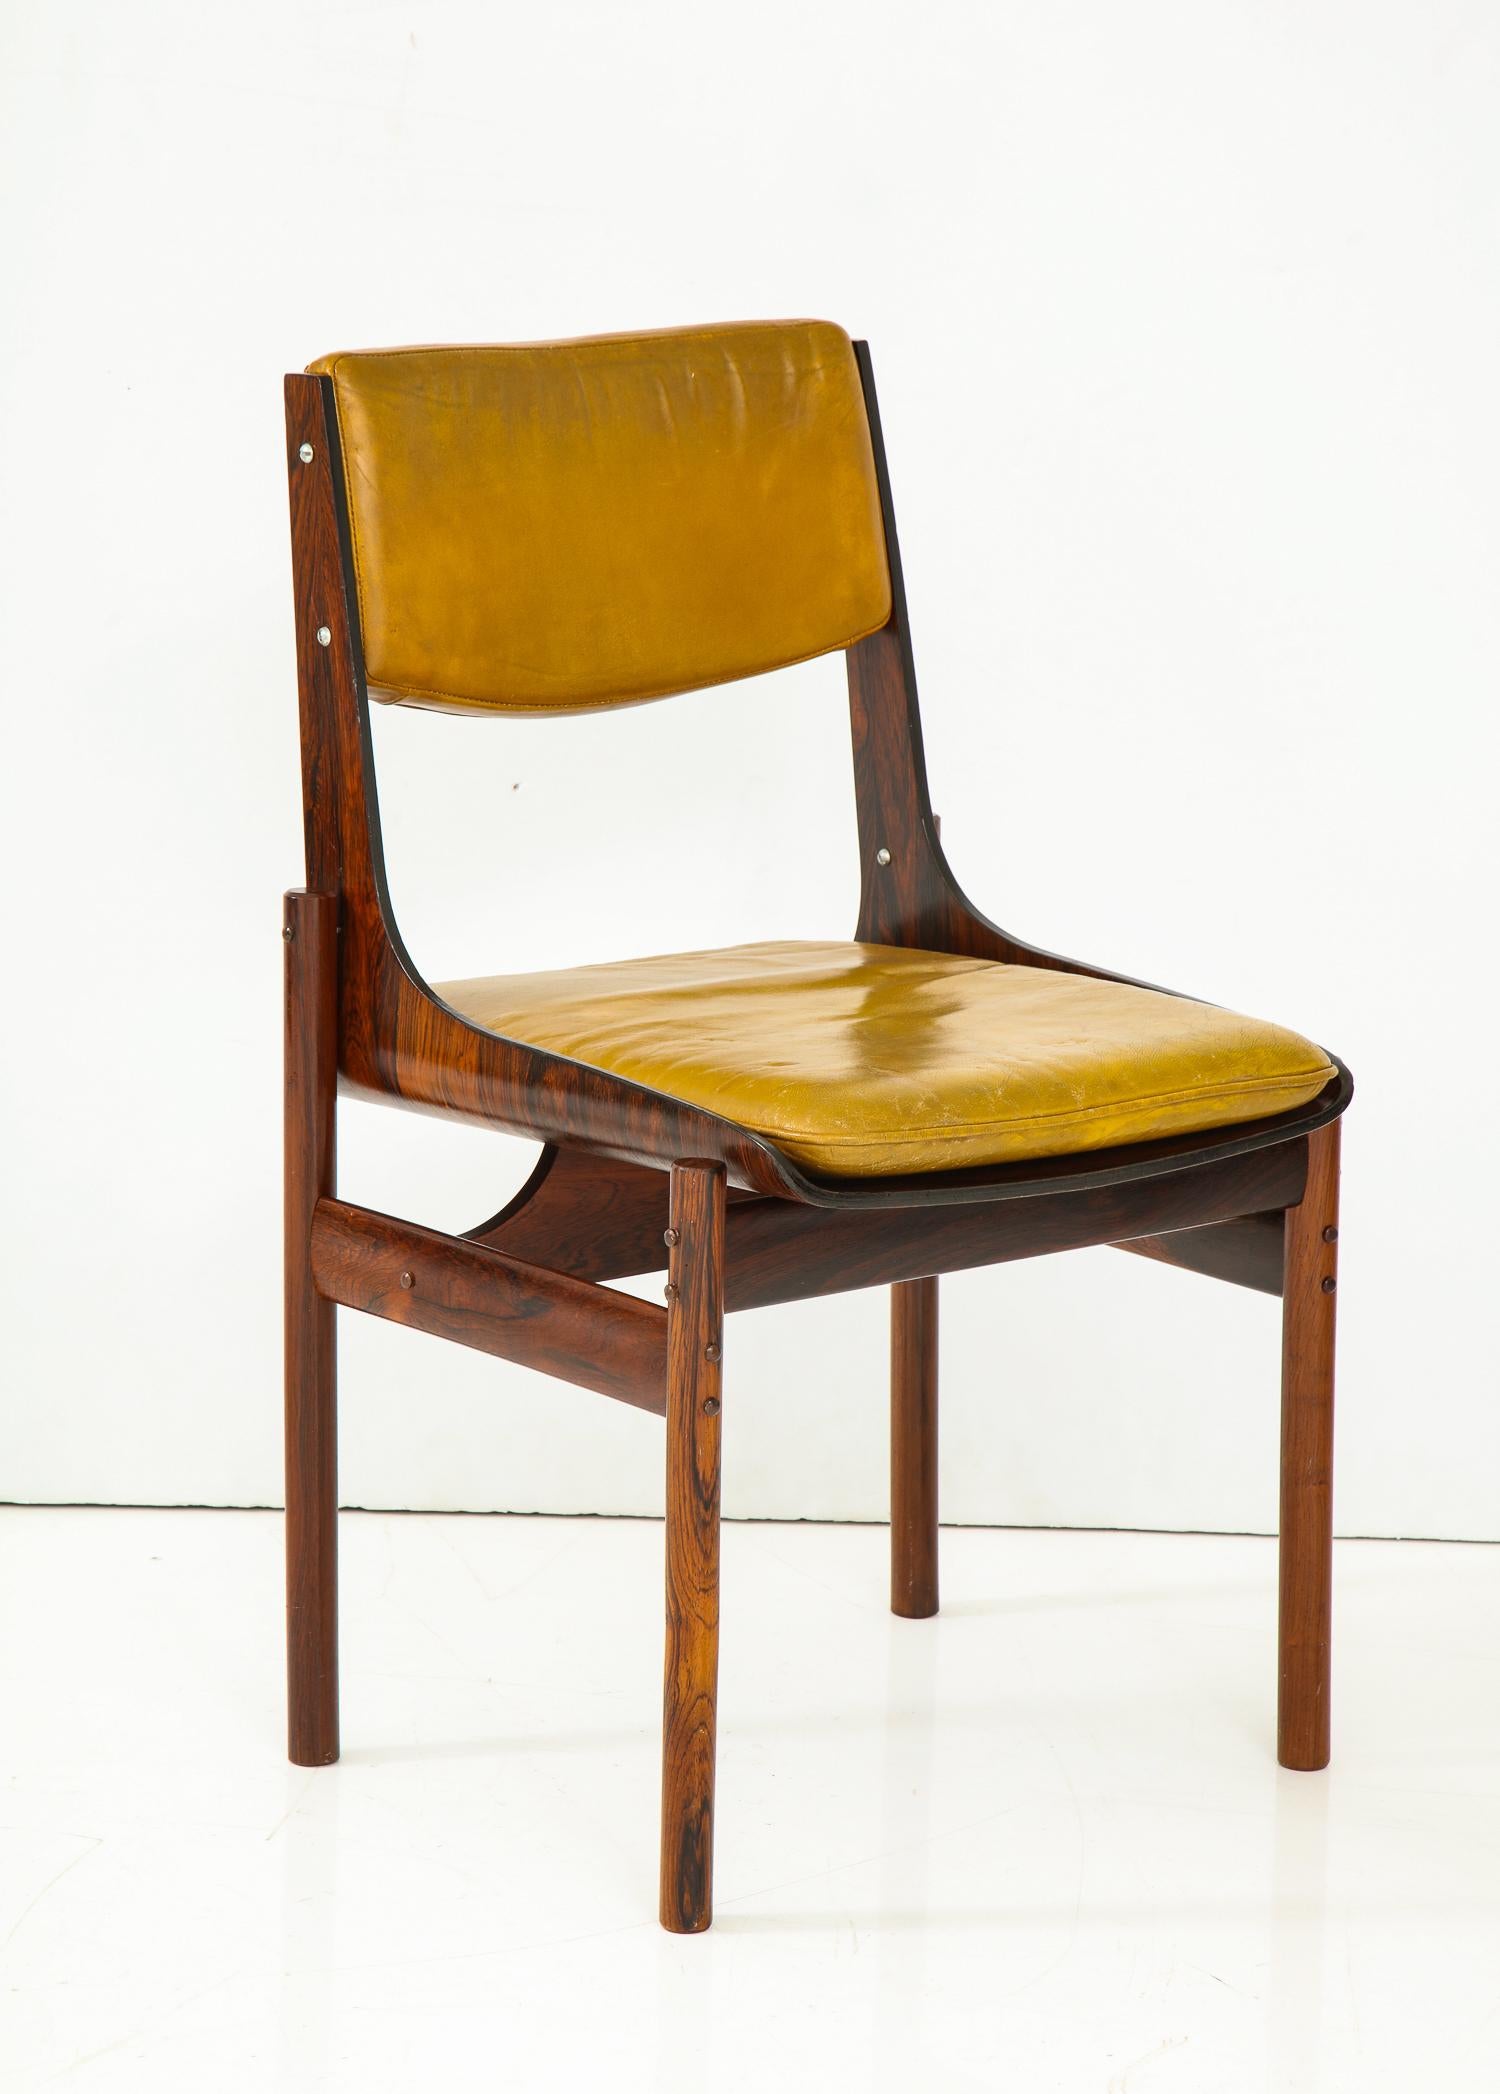 Mid-20th Century Seat of Four Jacaranda and Leather Chairs from Brazil